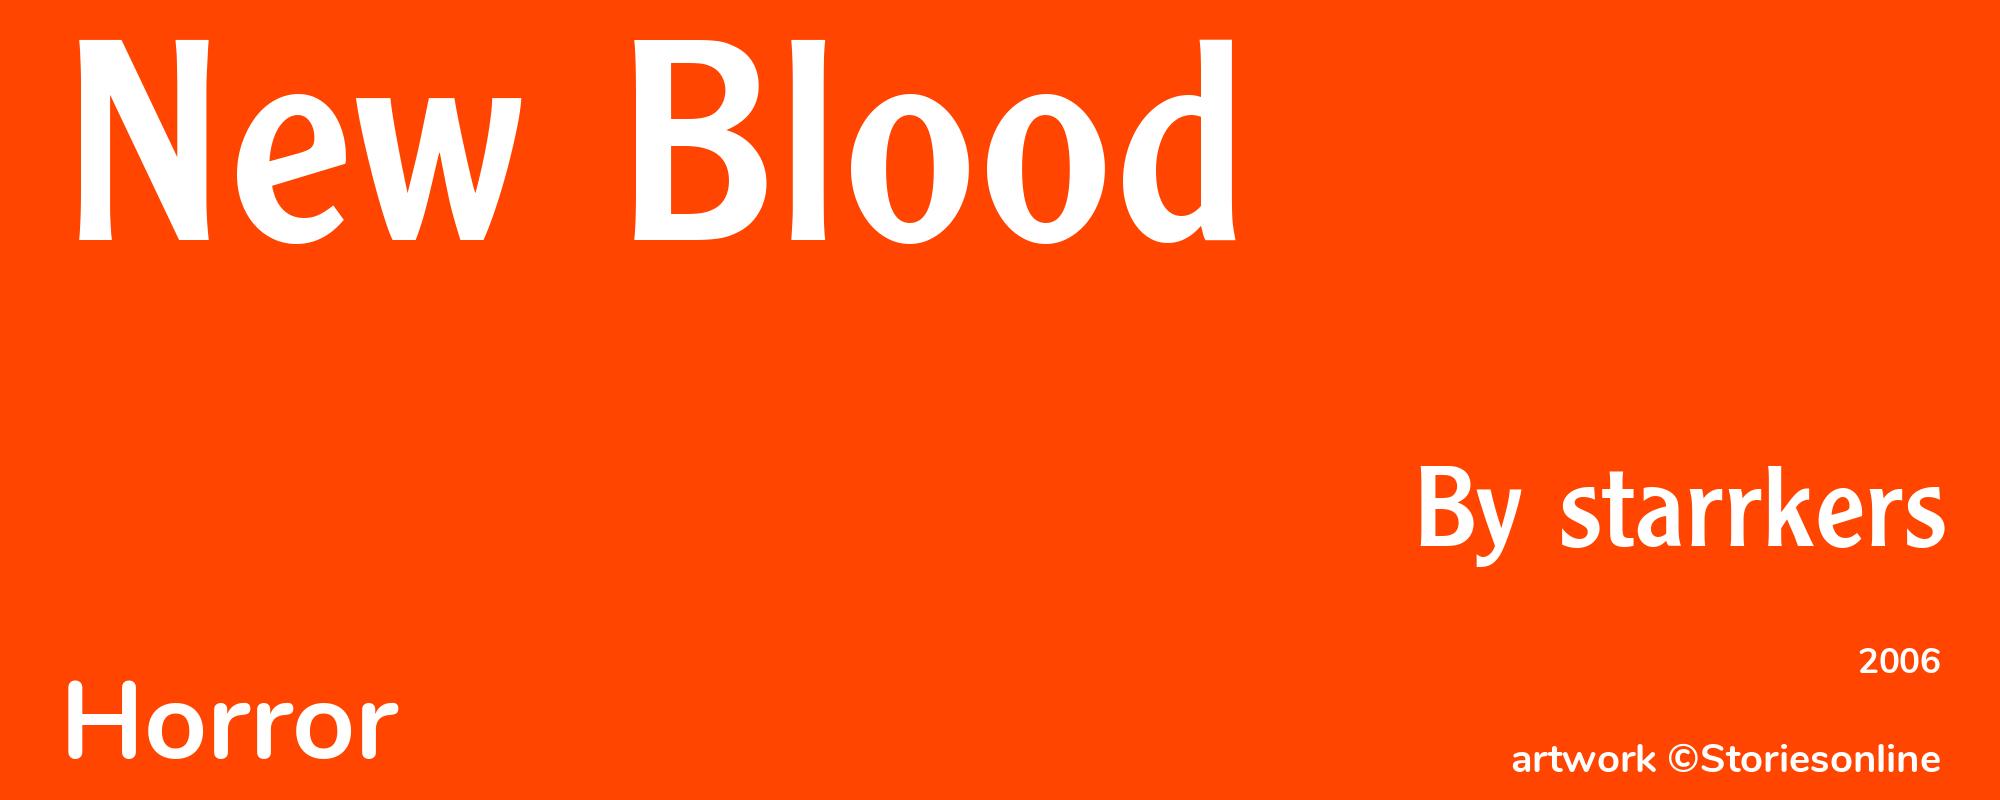 New Blood - Cover